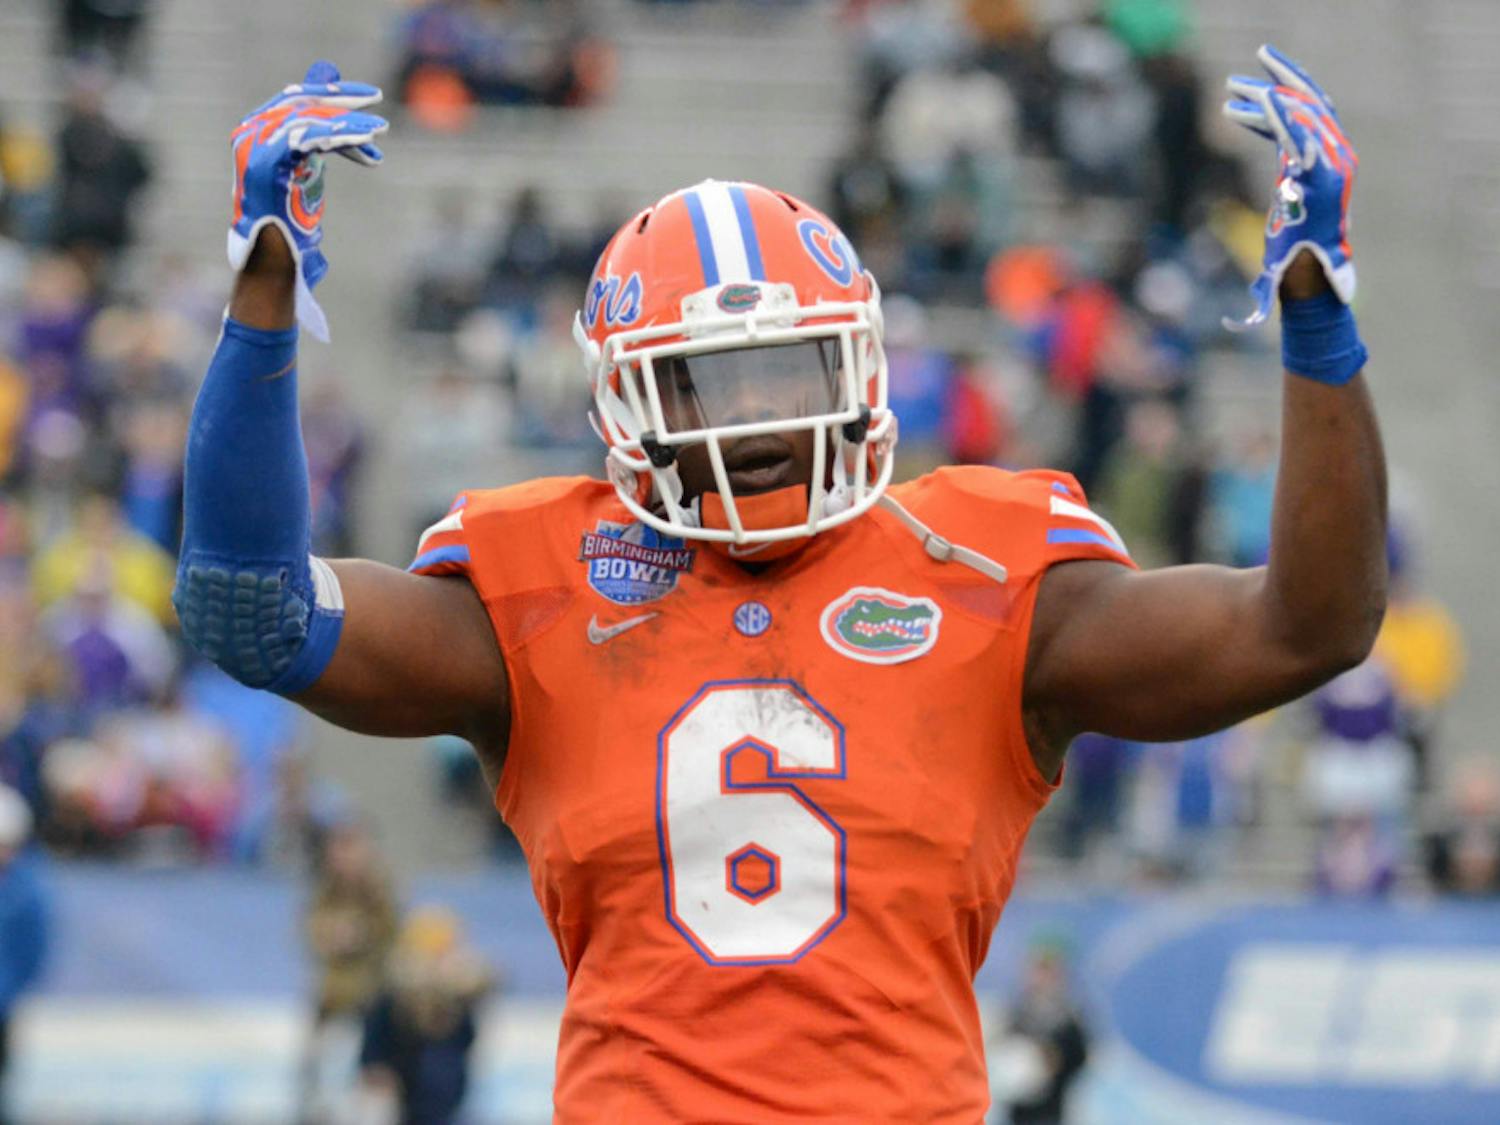 Dante Fowler Jr hypes up the crowd during Florida's 28-20 win in the Birmingham Bowl against East Carolina on Jan. 3 at Legion Field.